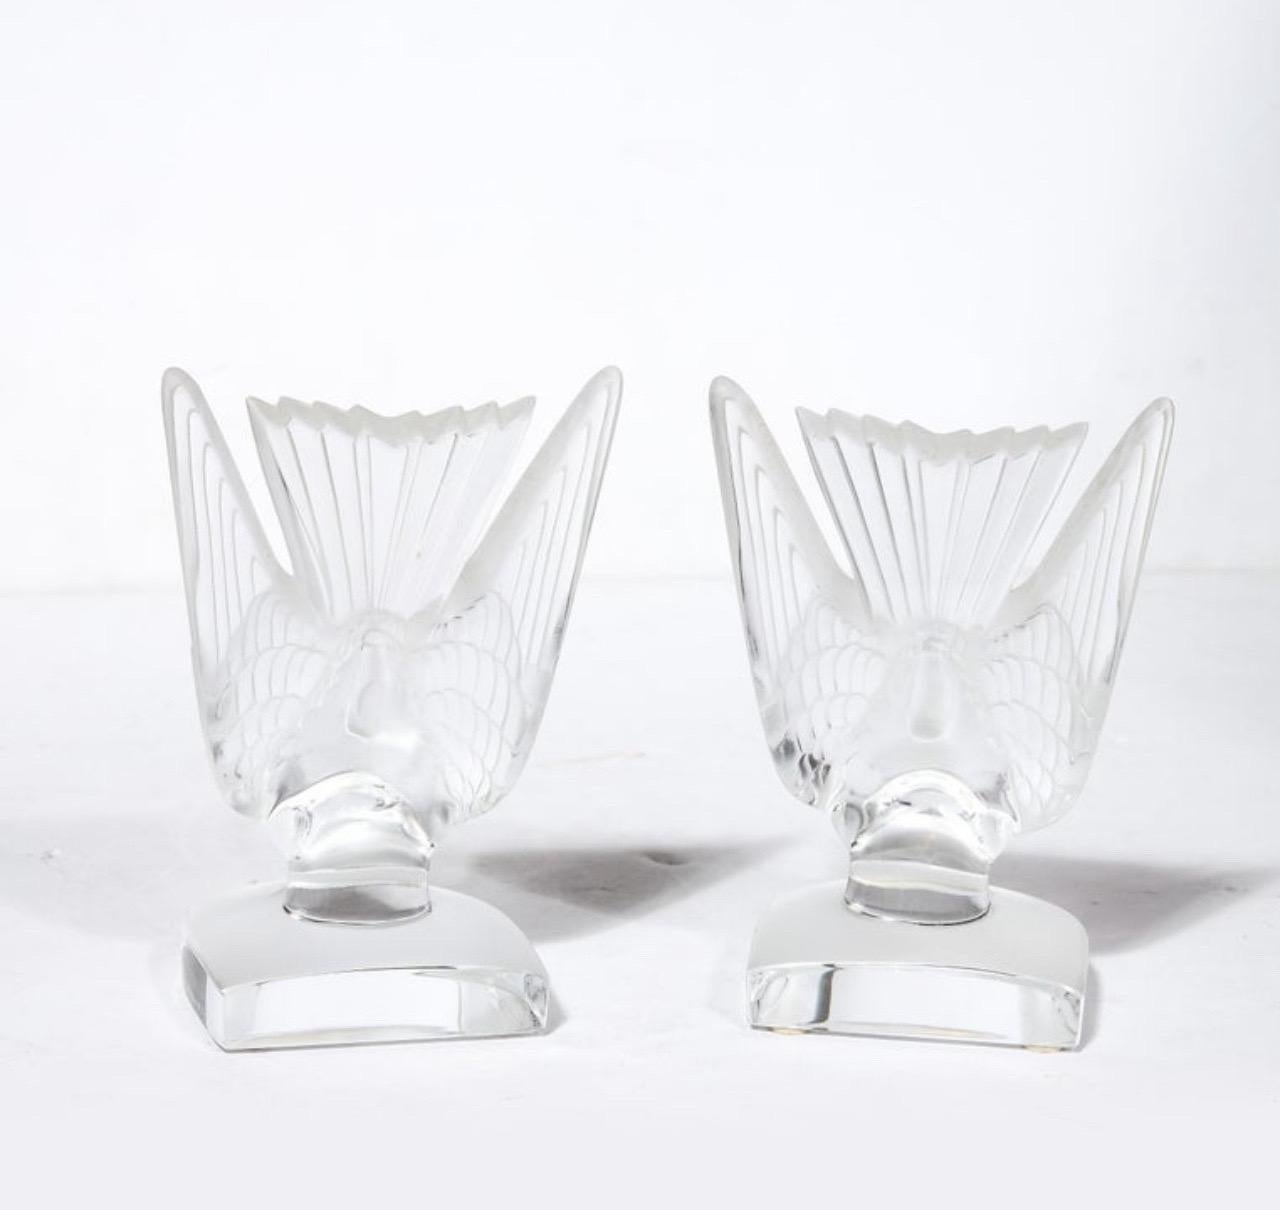 20th Century Pair of Frosted Crystal Hirondelle / Swallow Bookends by Lalique of France For Sale